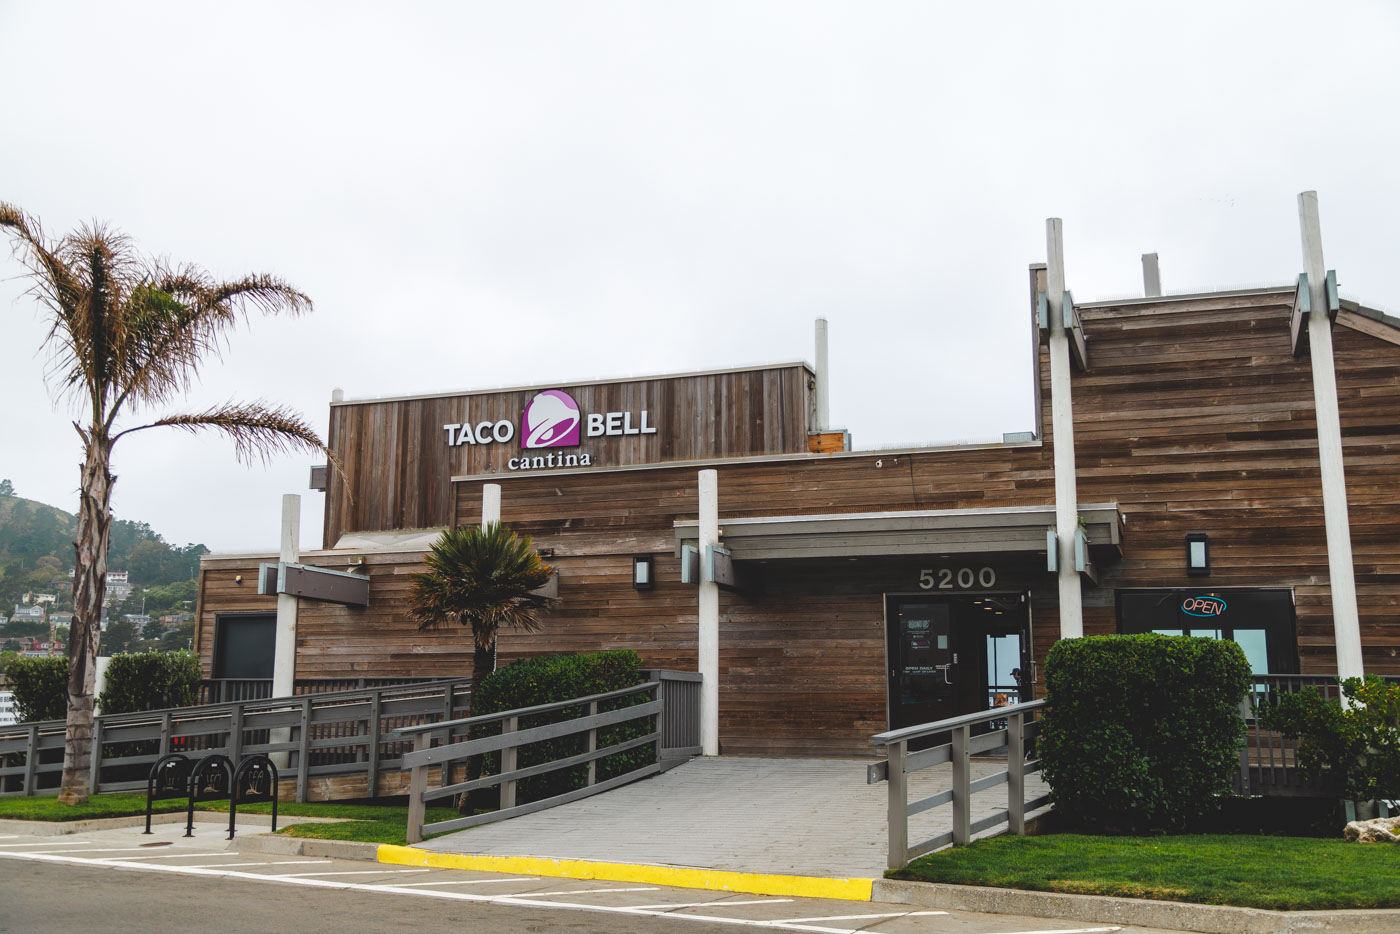 Taco Bell in Pacifica.